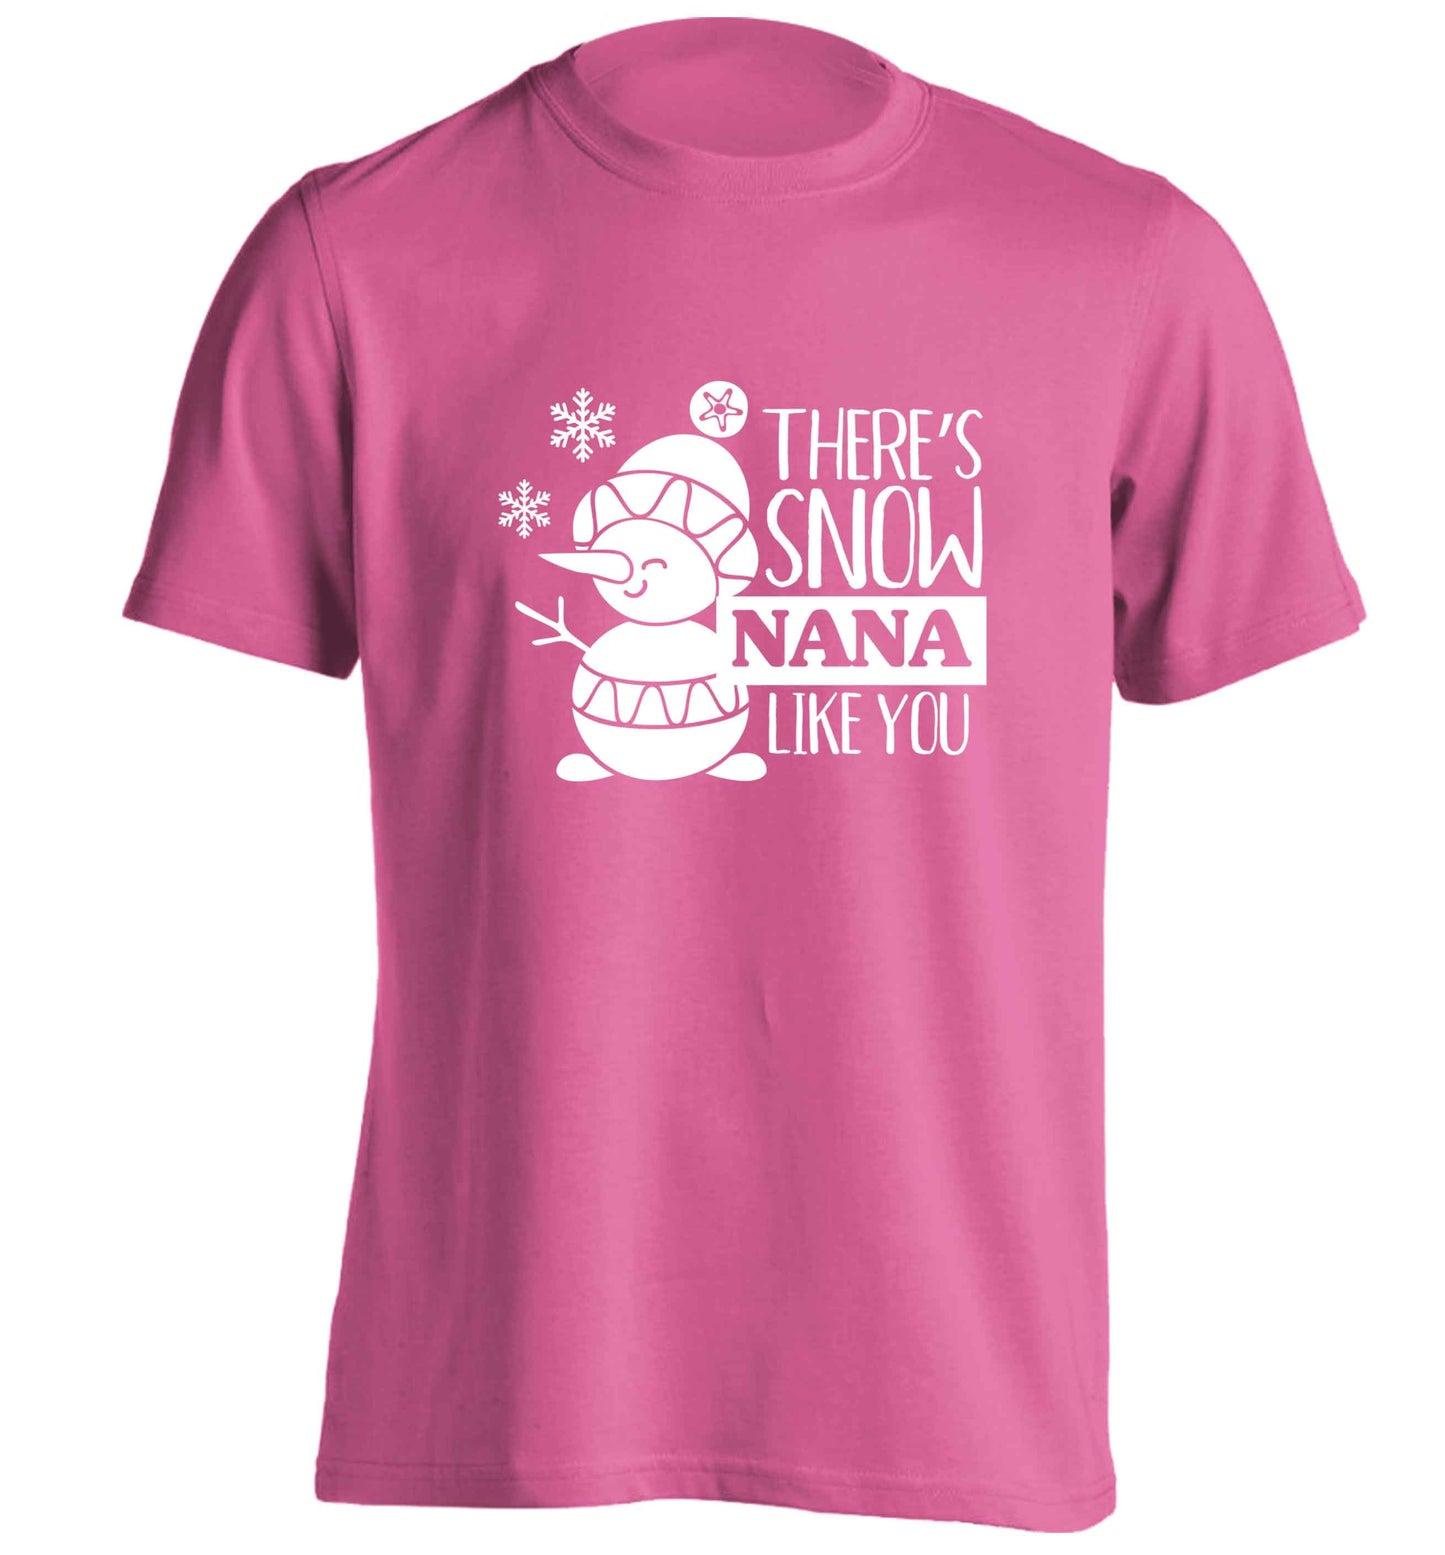 There's snow nana like you adults unisex pink Tshirt 2XL